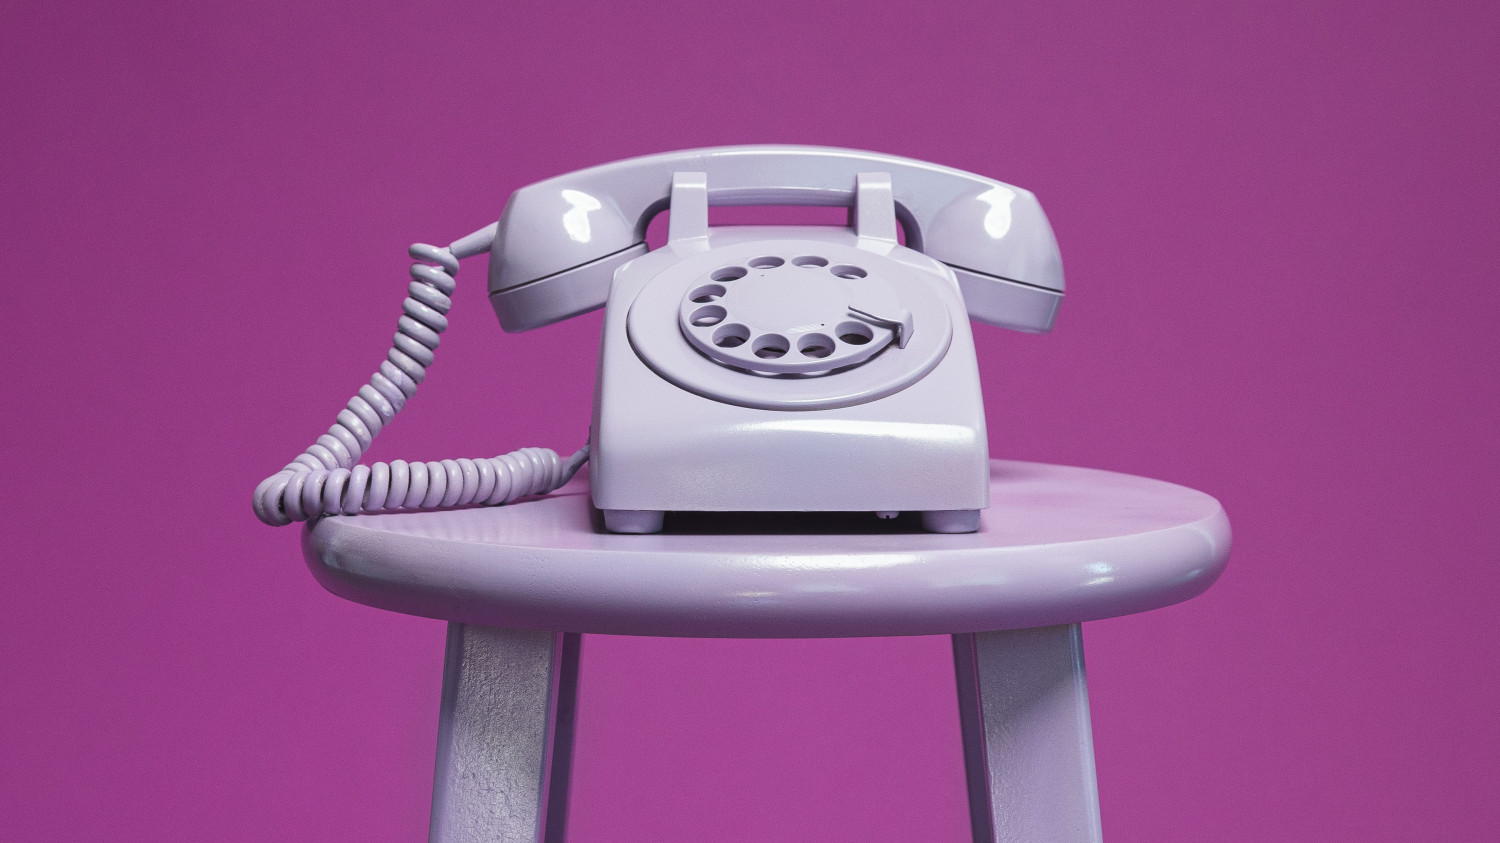 Image of a purple rotary phone on a purple stool against a purple background